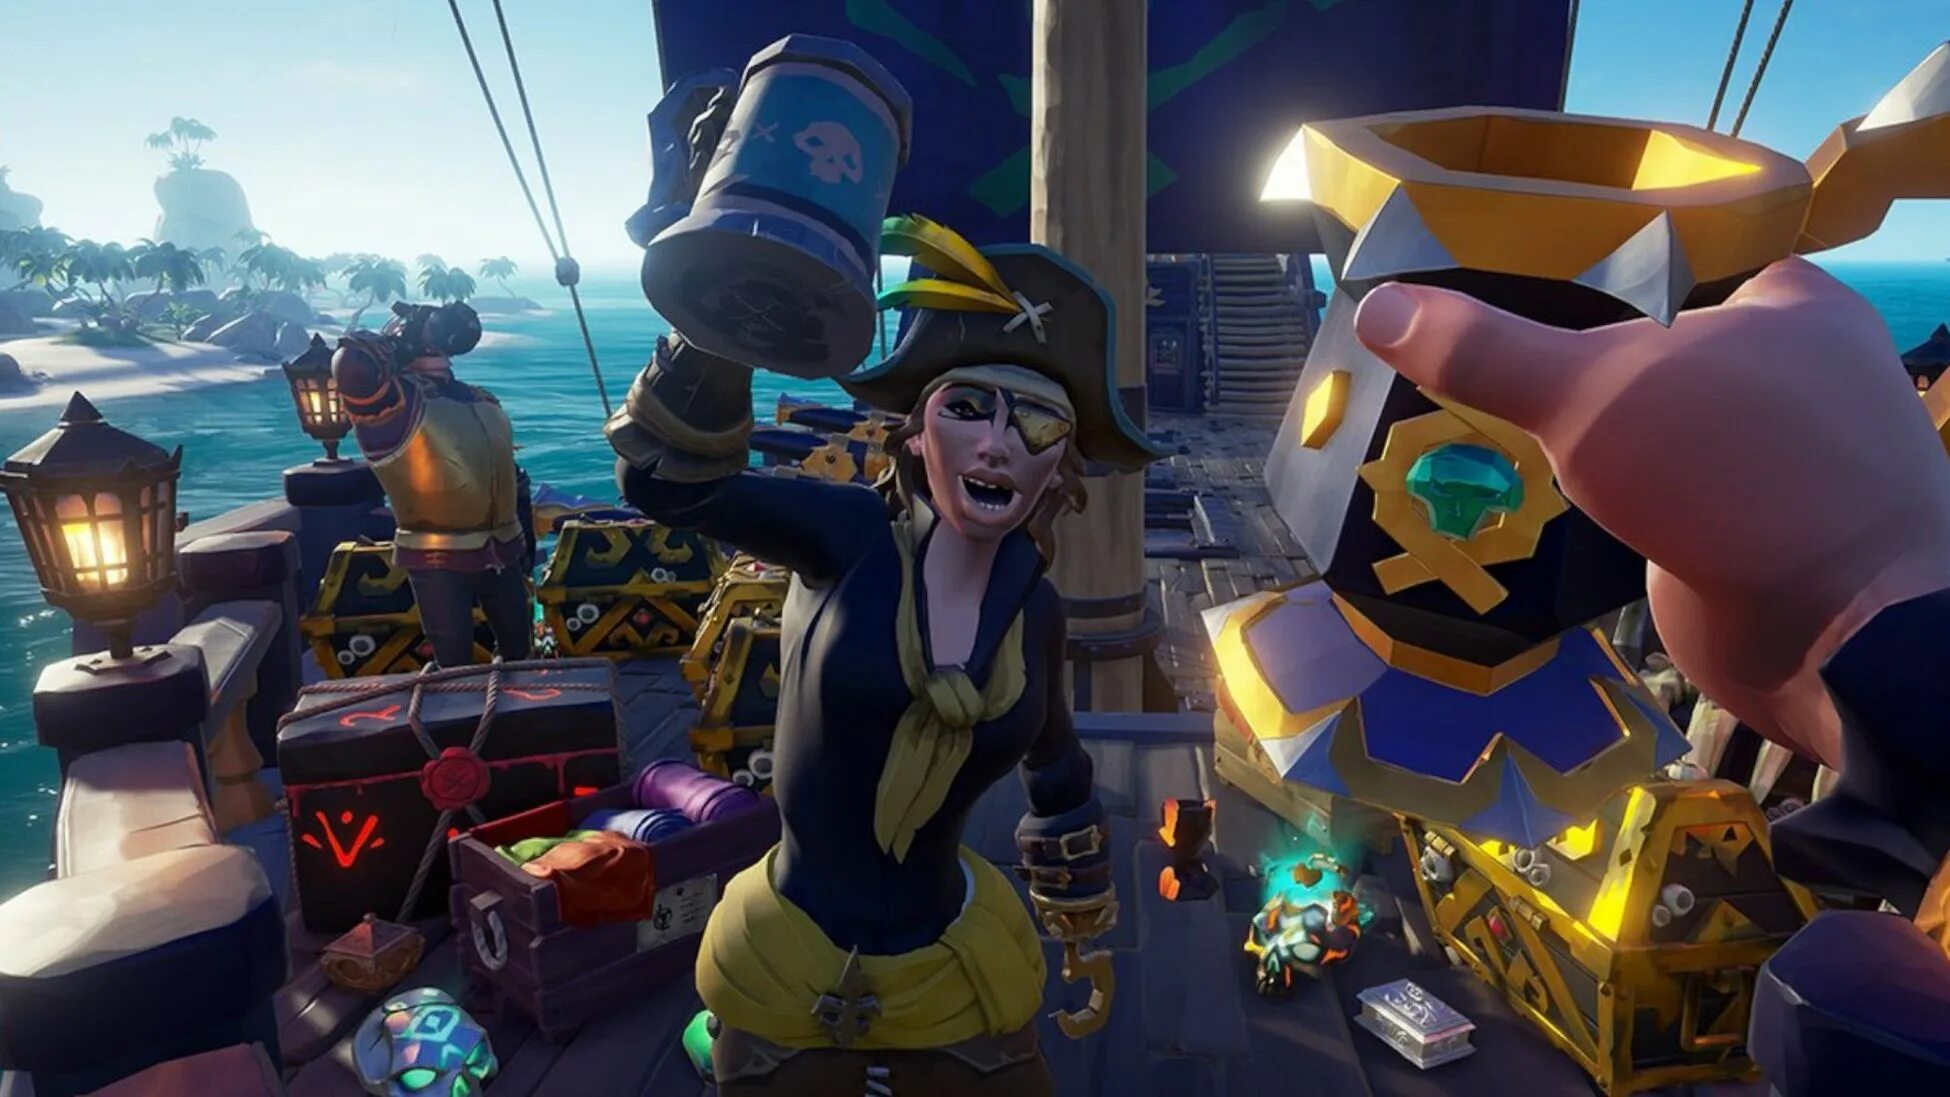 Sea of thieves донат. Игра Sea of Thieves. Игра про пиратов Sea of Thieves. Sea of Thieves/море воров. Sea of Thieves 2.